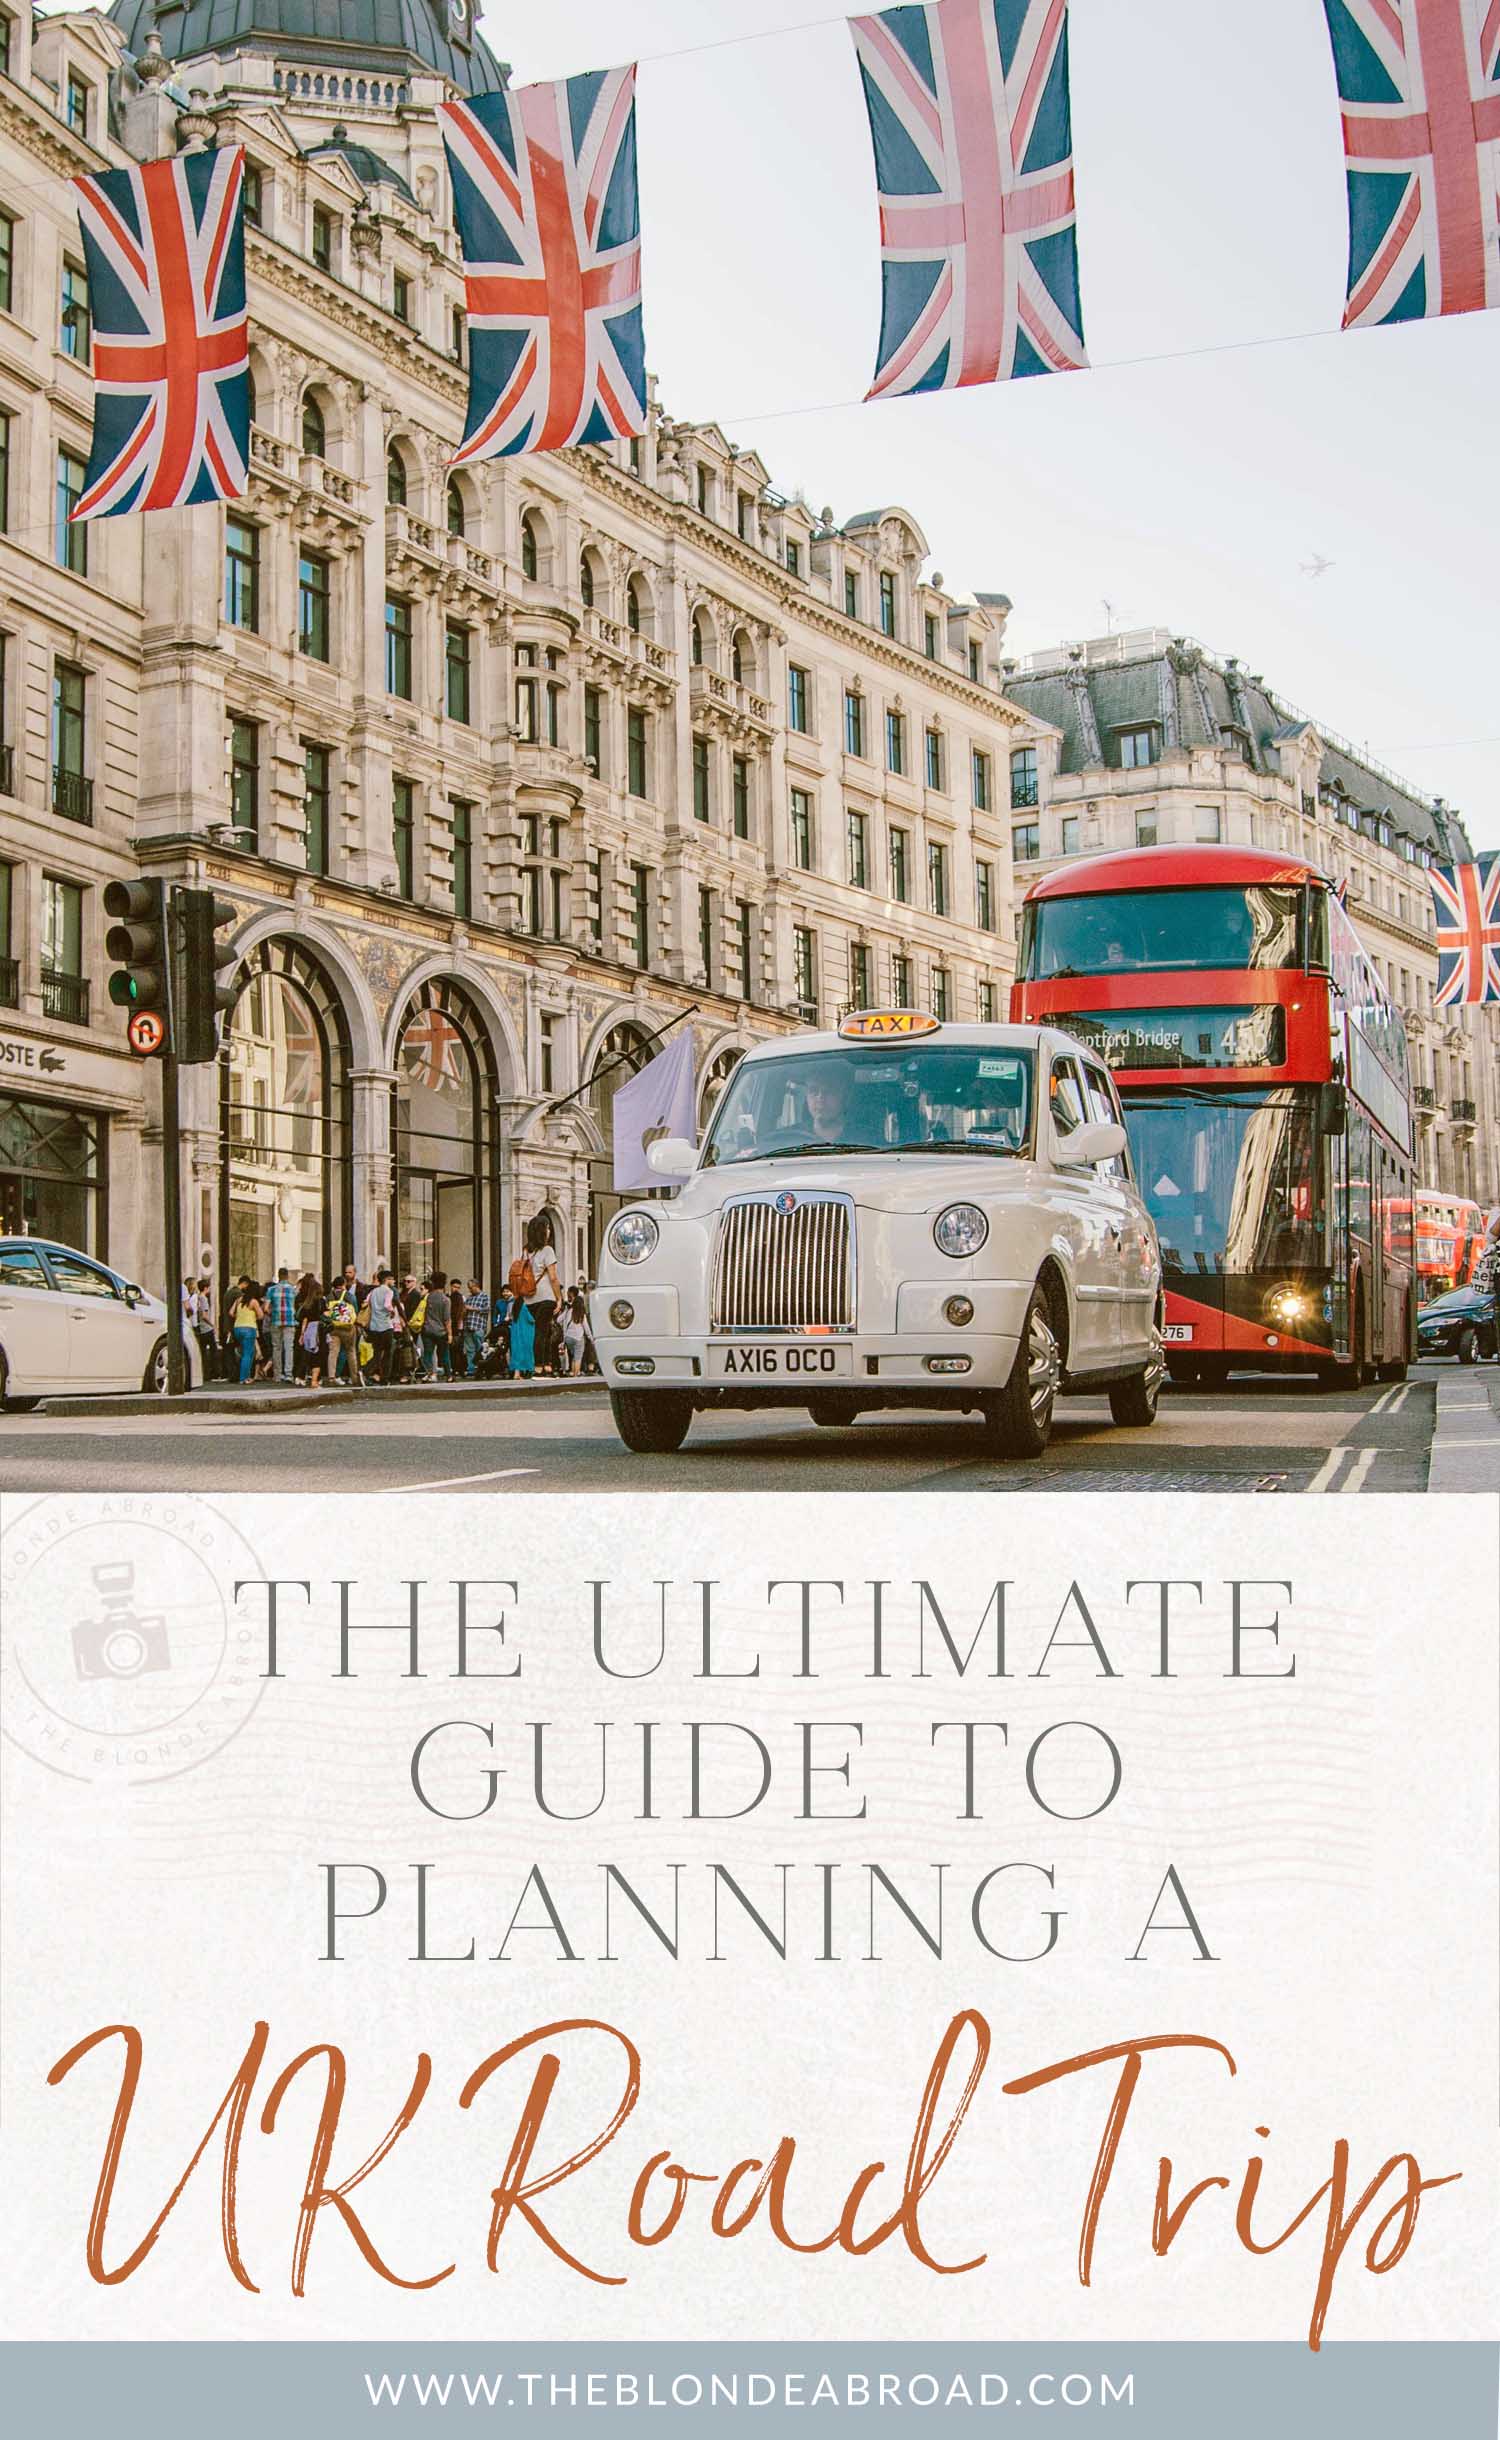 The Ultimate Guide to Planning a UK Road Trip